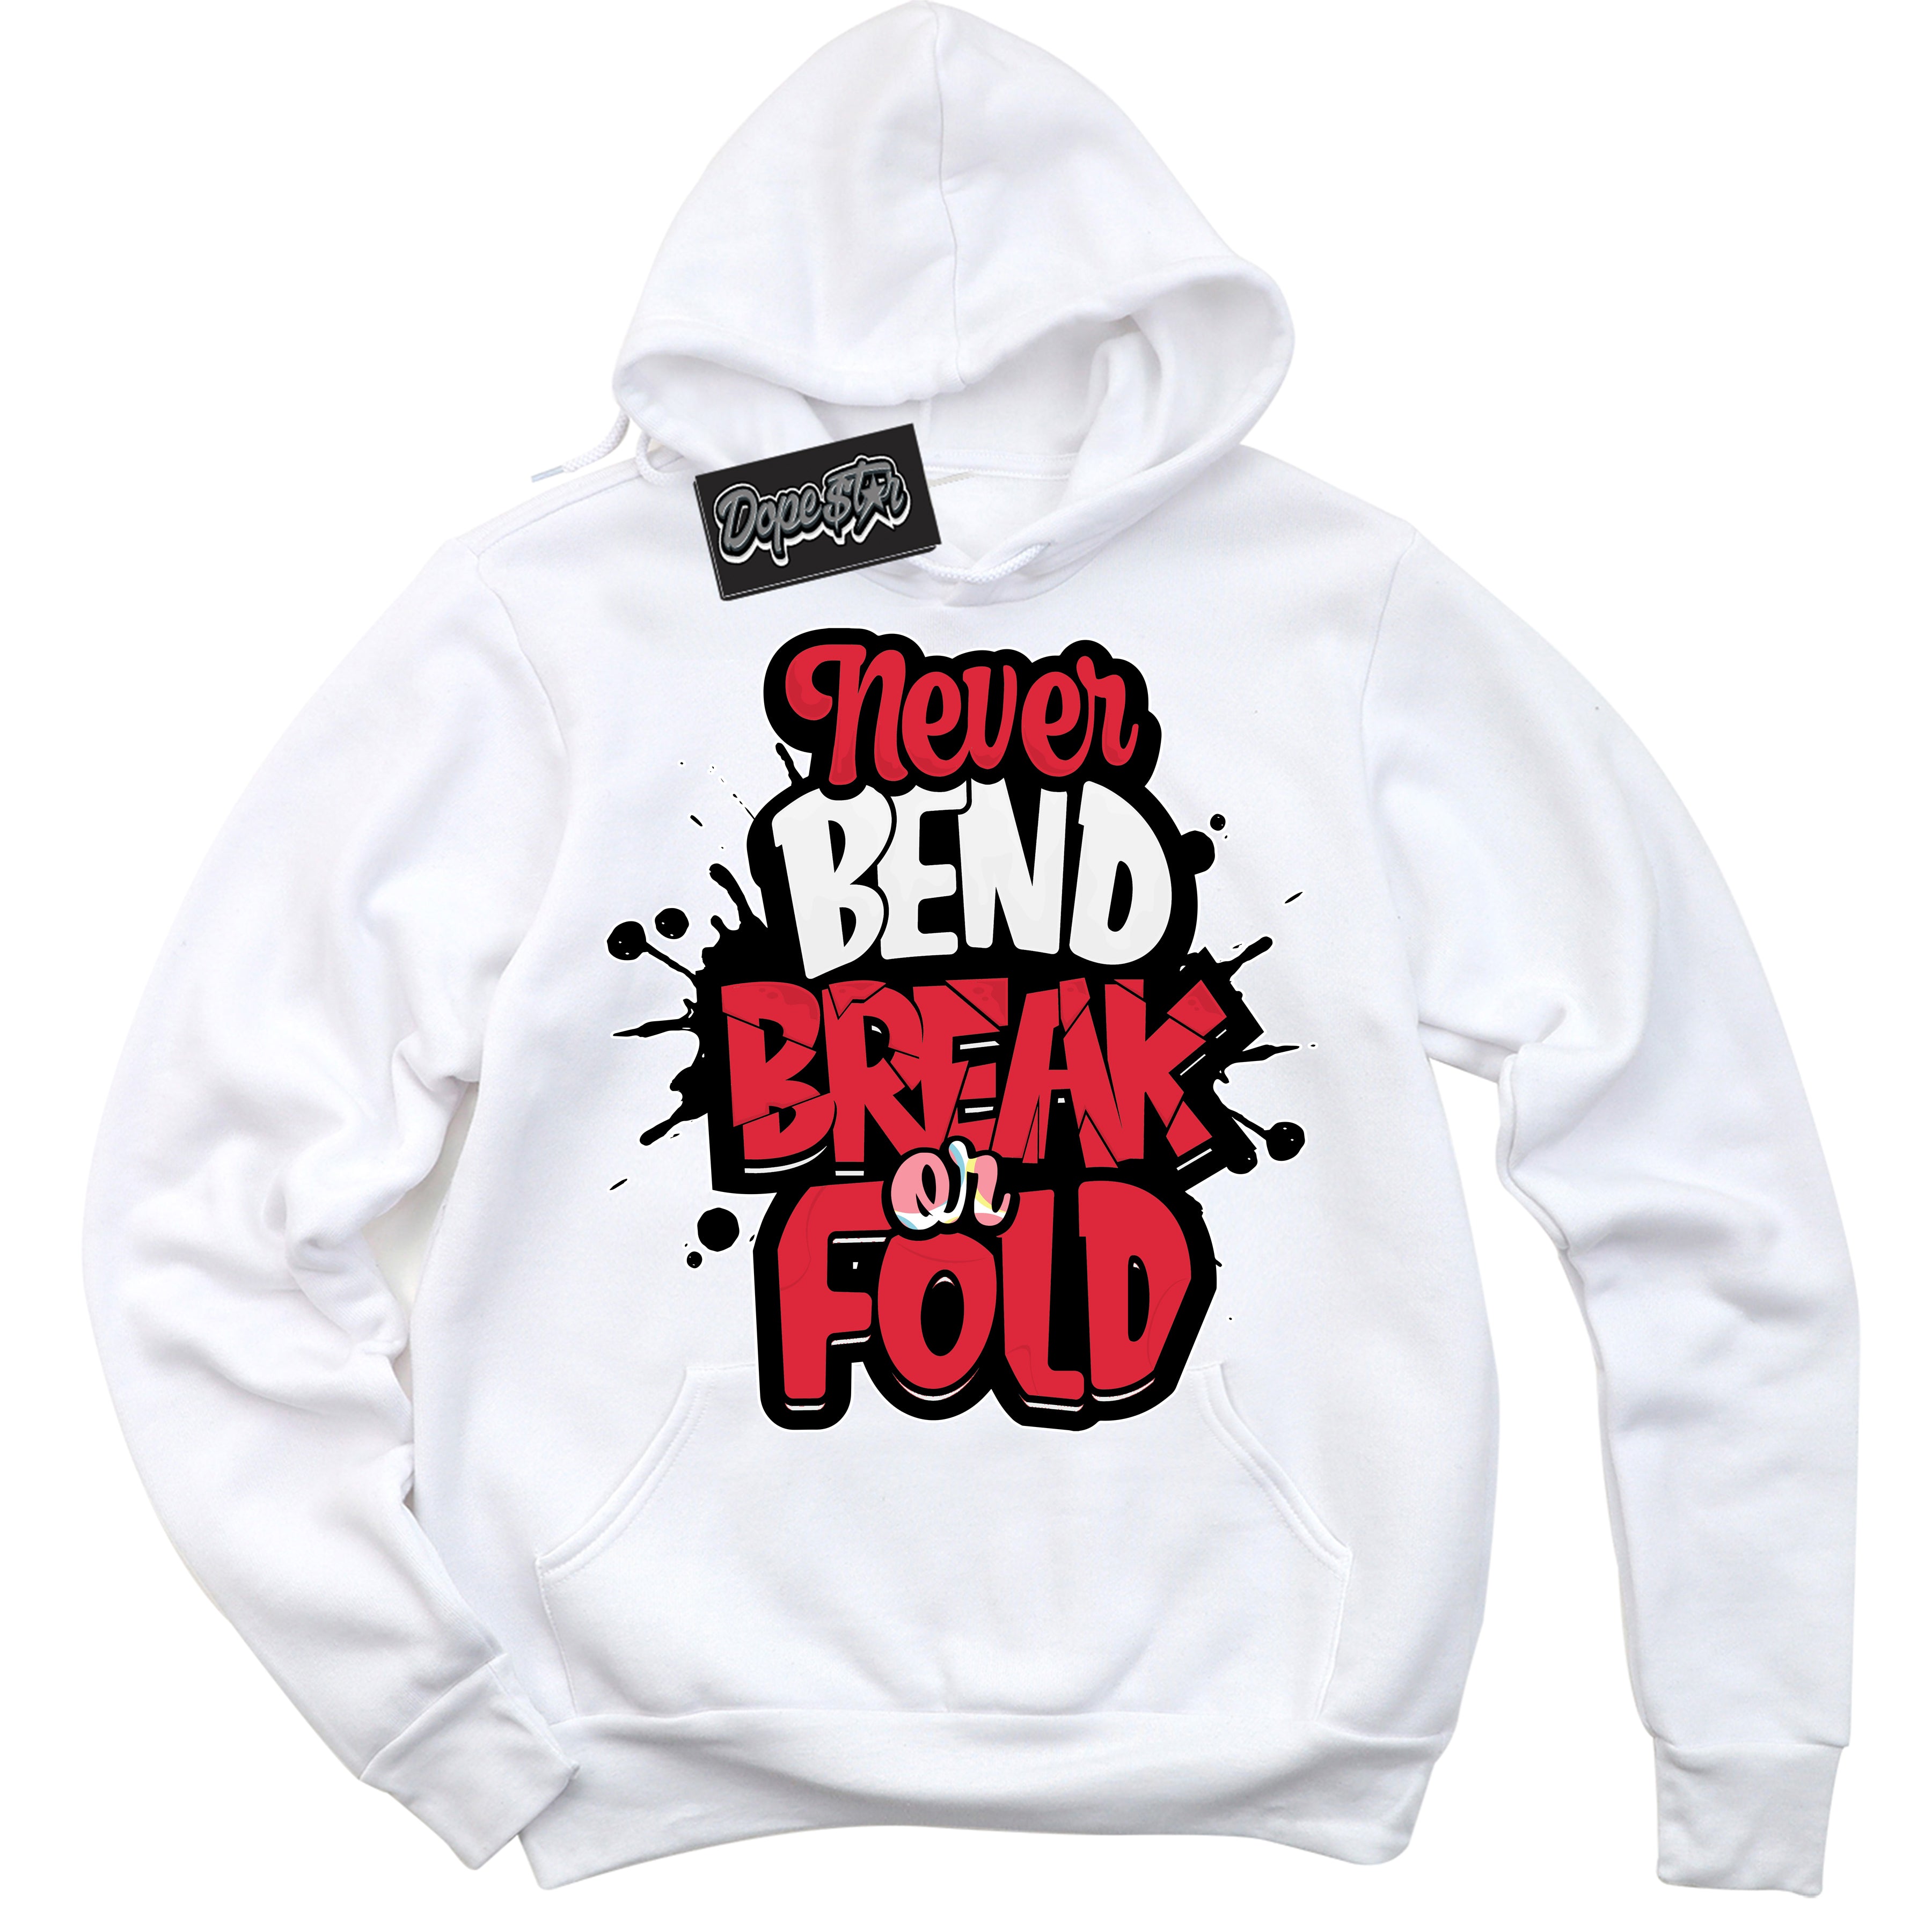 Cool White Graphic DopeStar Hoodie with “ Never Bend Break Or Fold “ print, that perfectly matches Spider-Verse 1s sneakers